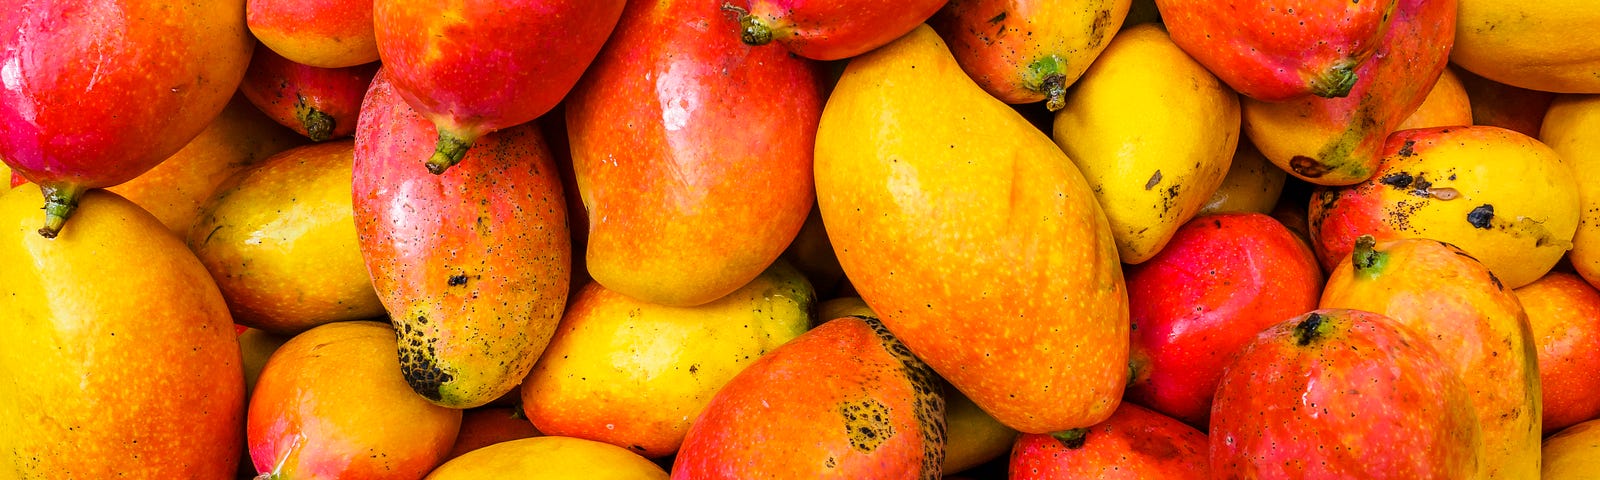 A pile of many brightly colored mangos.